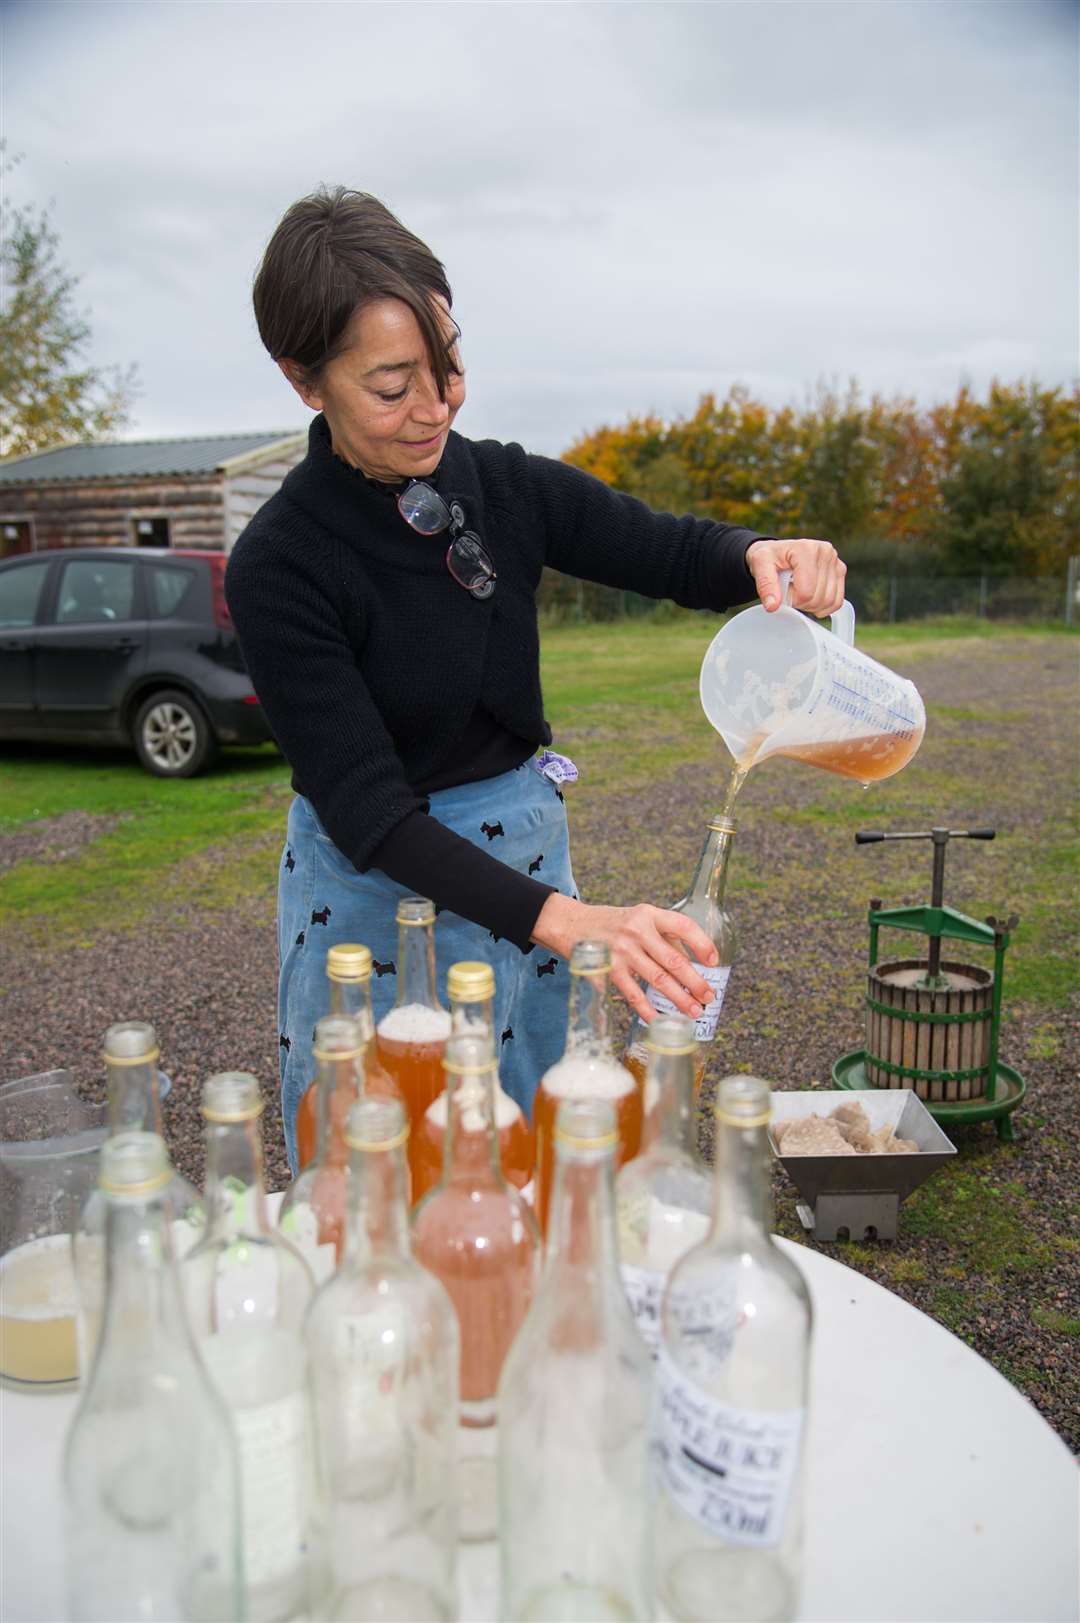 Kelly Warren pouring juice into bottles ready to be sold.